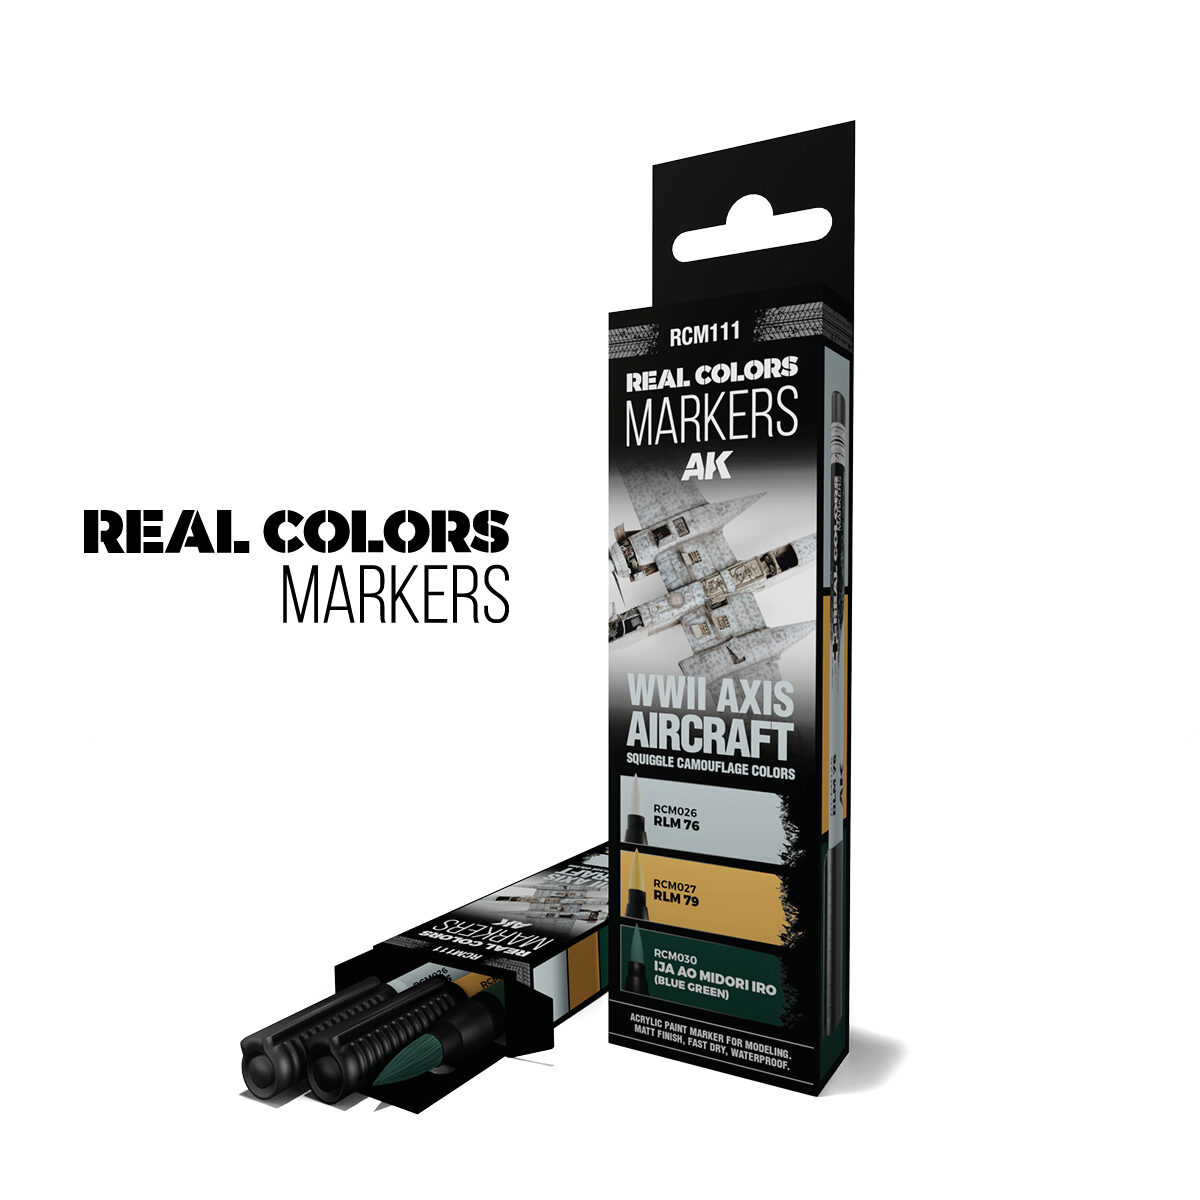 AK RCM111 WWII AXIS AIRCRAFT SQUIGGLE CAMOUFLAGE COLORS - SET 3 REAL COLORS MARKERS